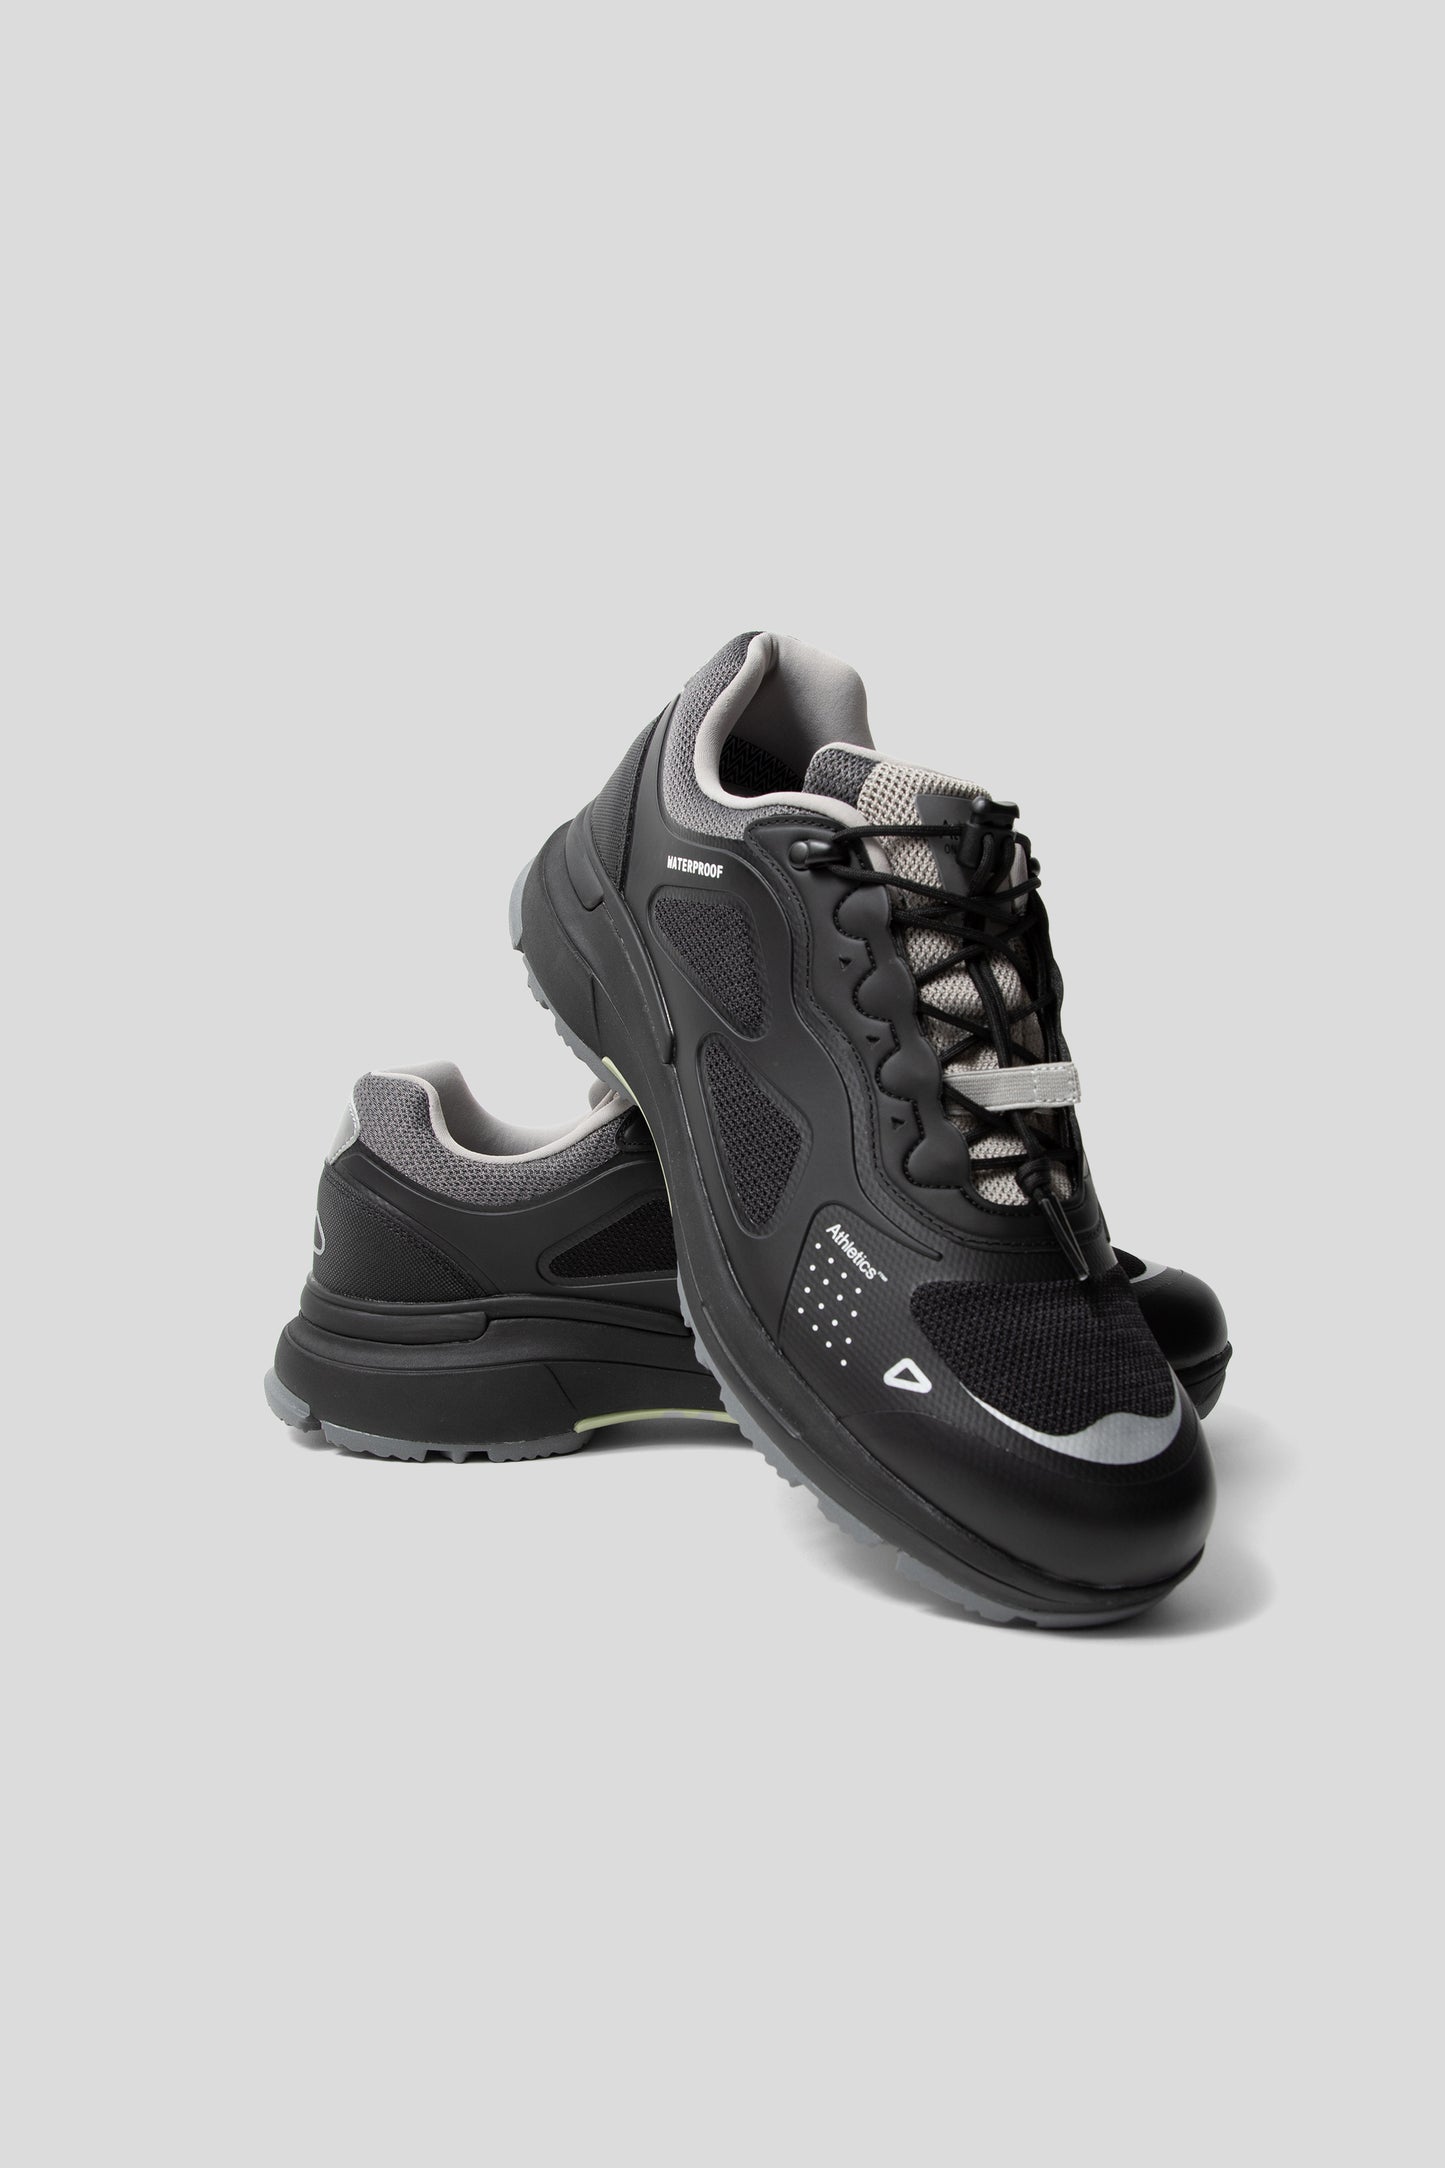 Athletic FTWR One 2 Waterstop Low's in Night Raven colourway